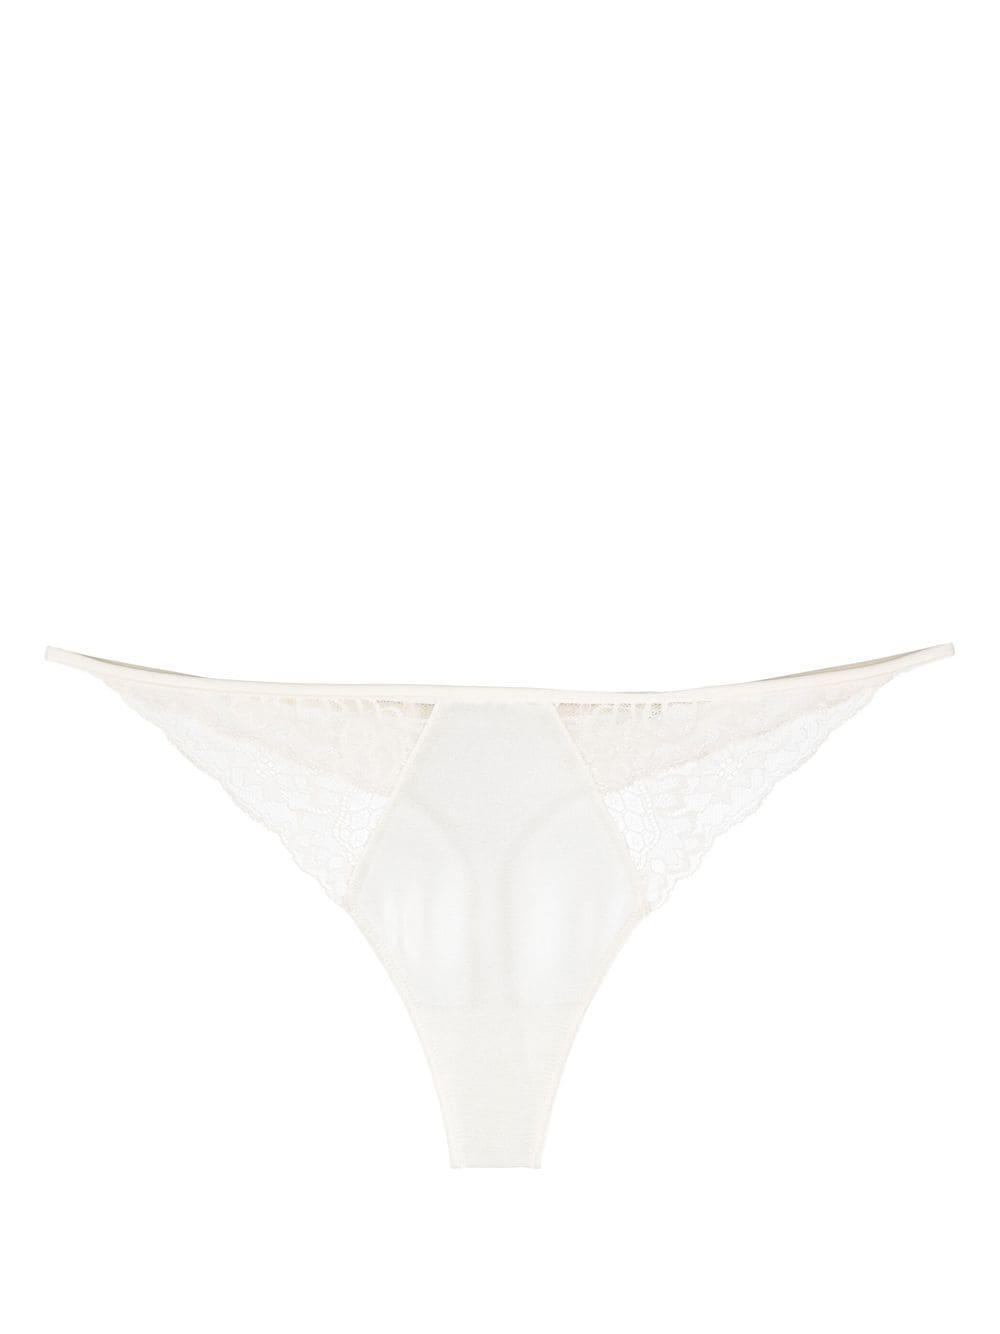 Calvin Klein Floral Lace Thong in White | Lyst